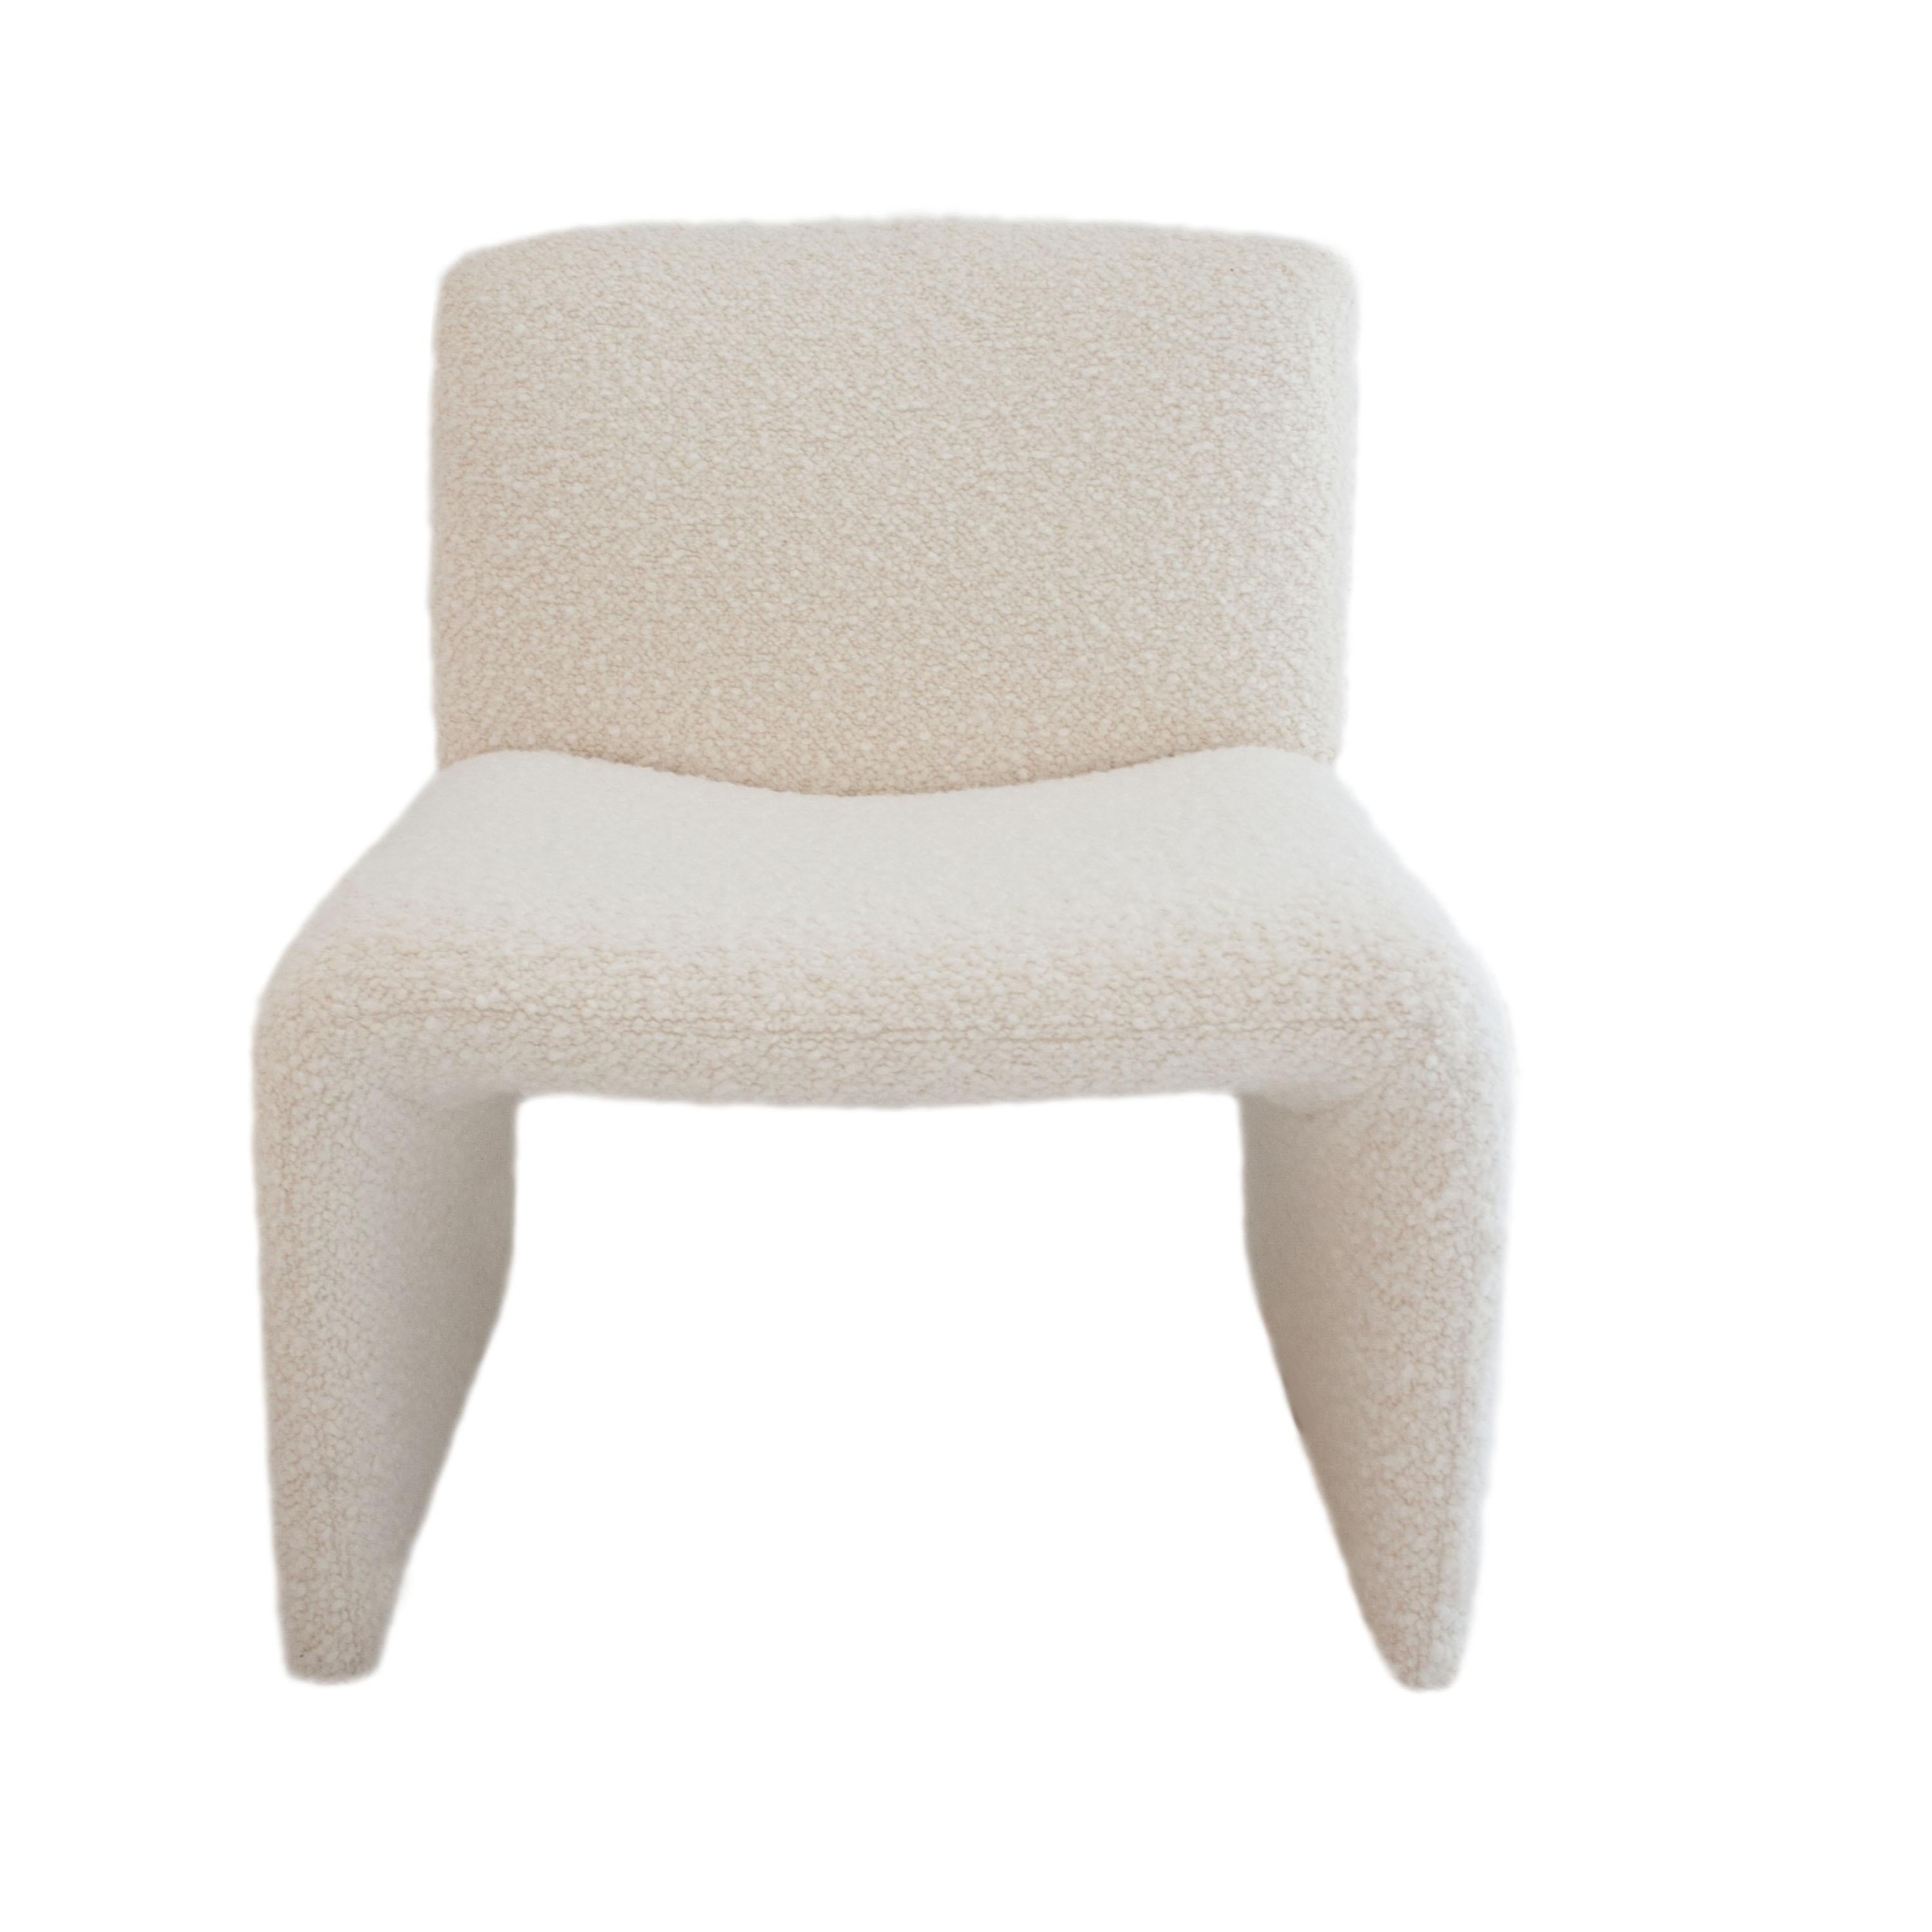 Mid-Century Modern armchair designed in the style of Oliver Mourgue. Solid wood structure upholstered in beige wool boucle.